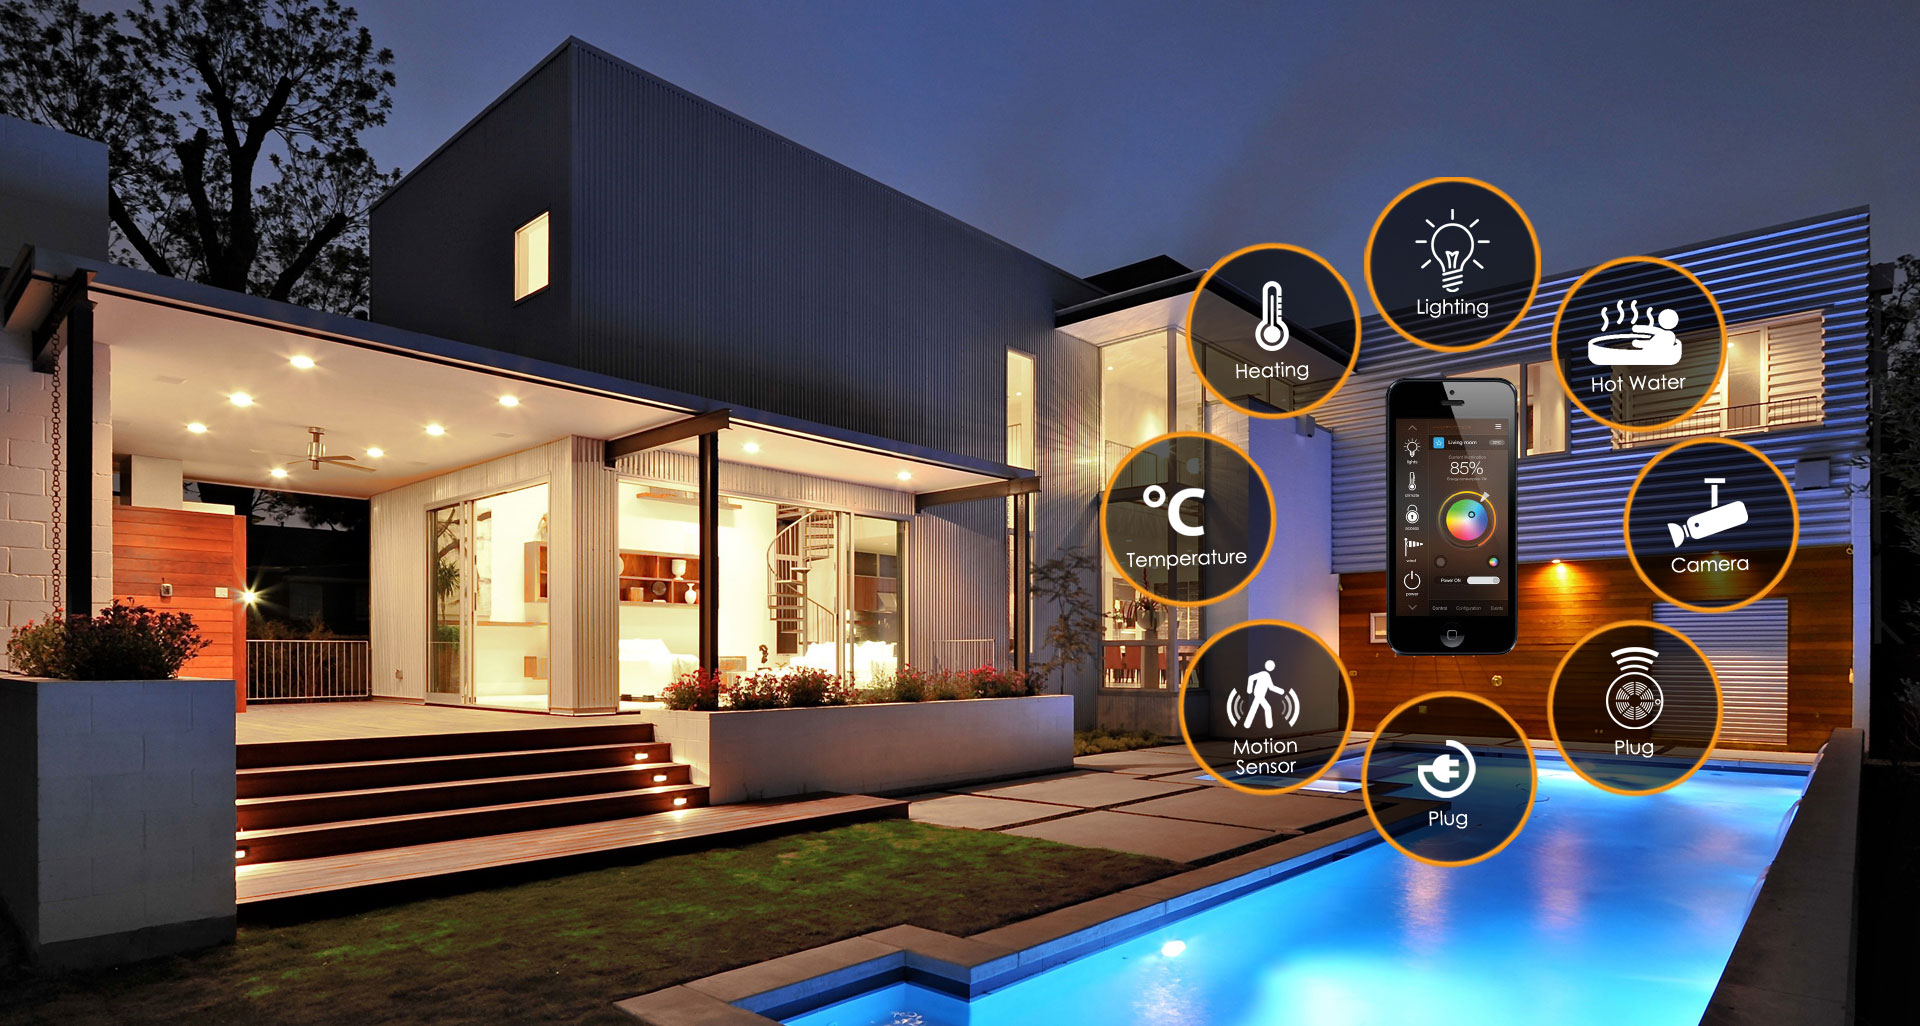 The Best Smart Home Gadgets to Control and Protect Your House